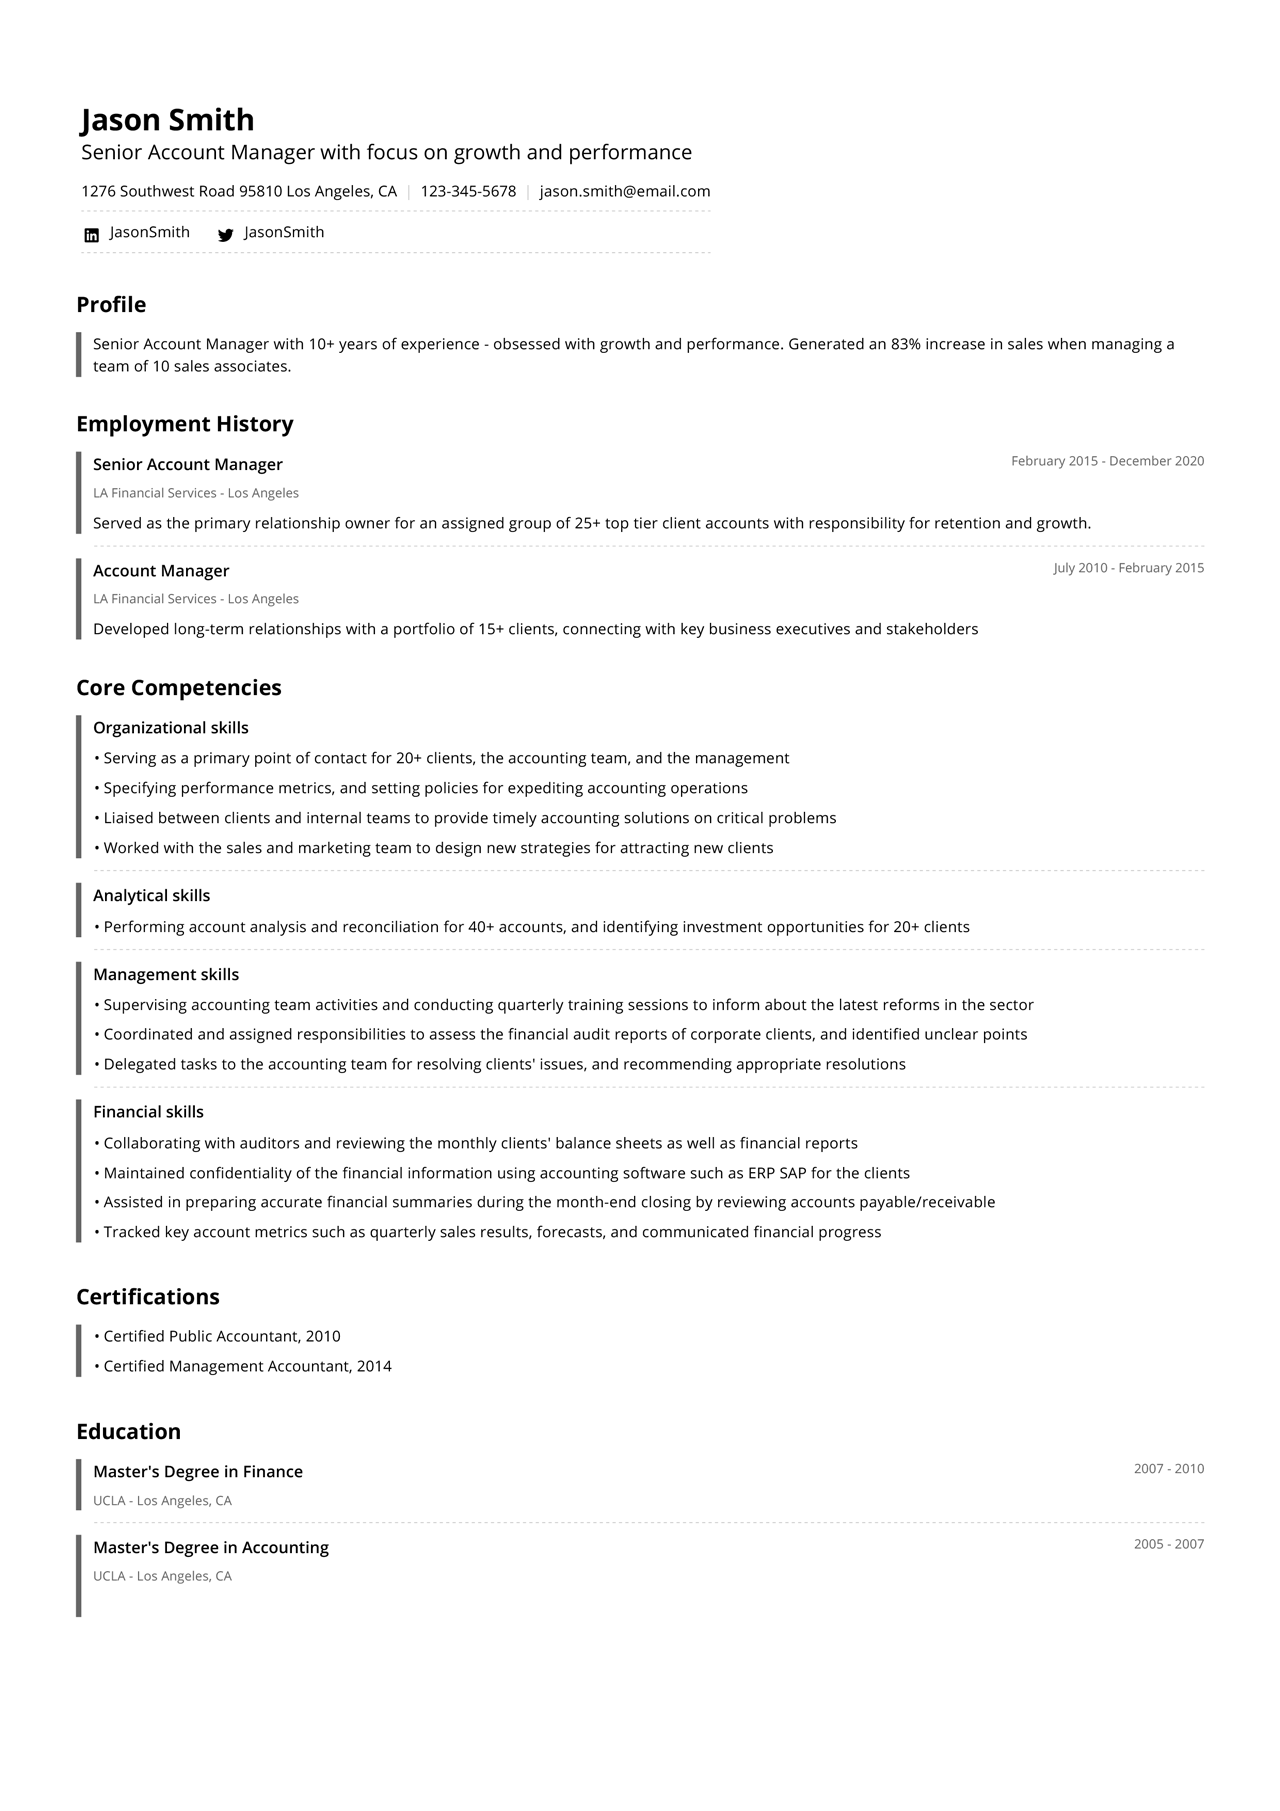 Image of a combination resume example from a senior account manager